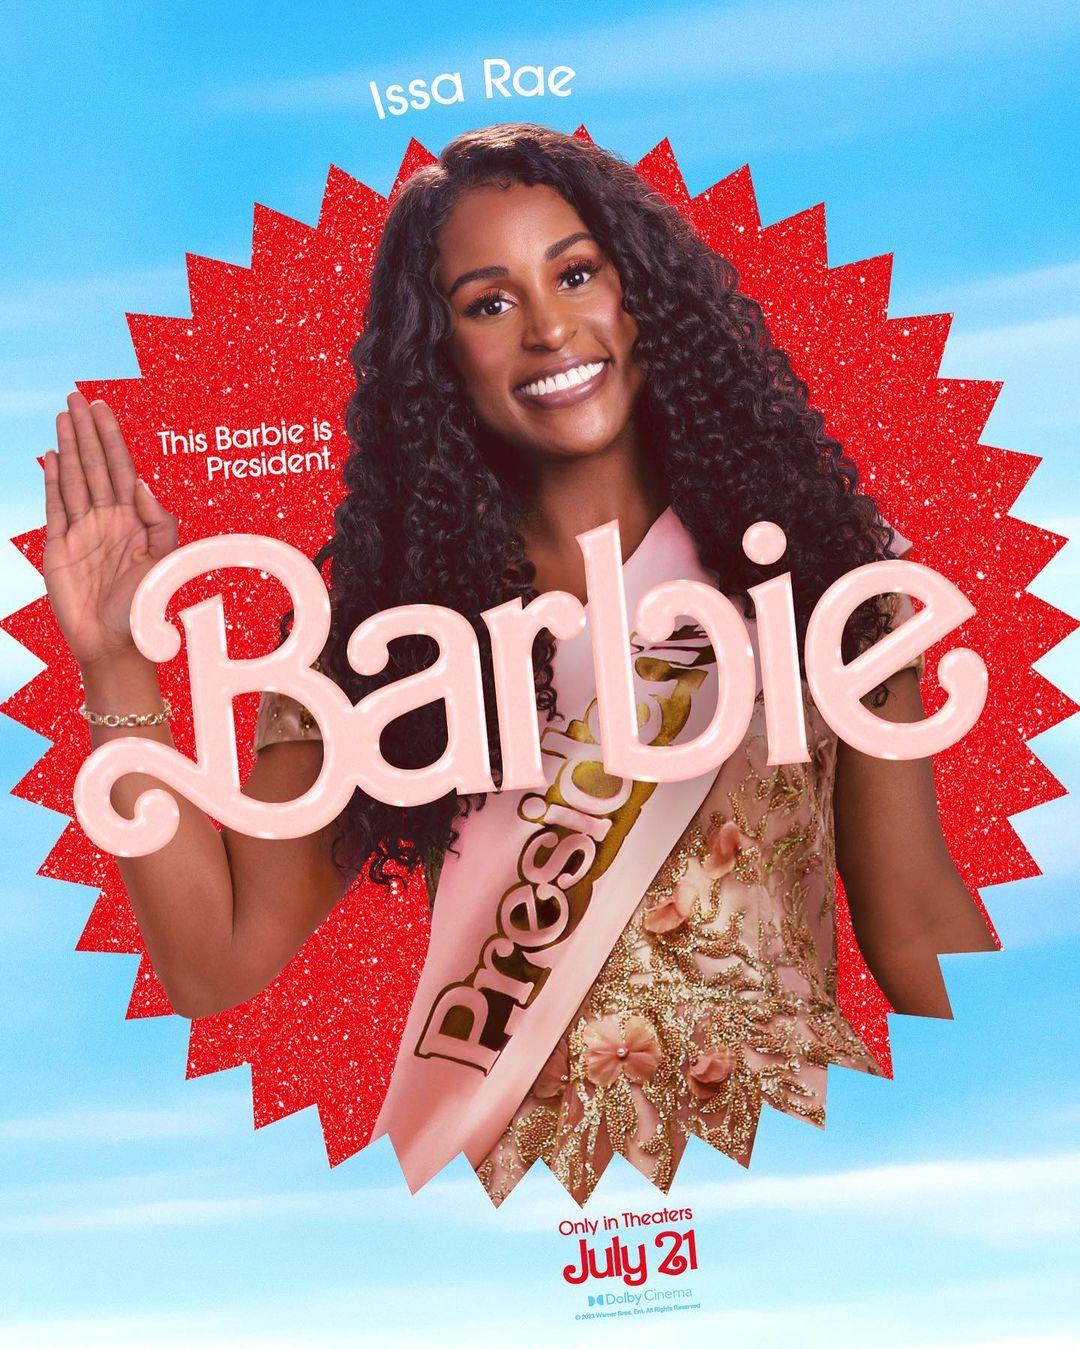 Issa Rae Warns Fans They Need To 'Form Their Own Opinion' On 'Barbie' Movie